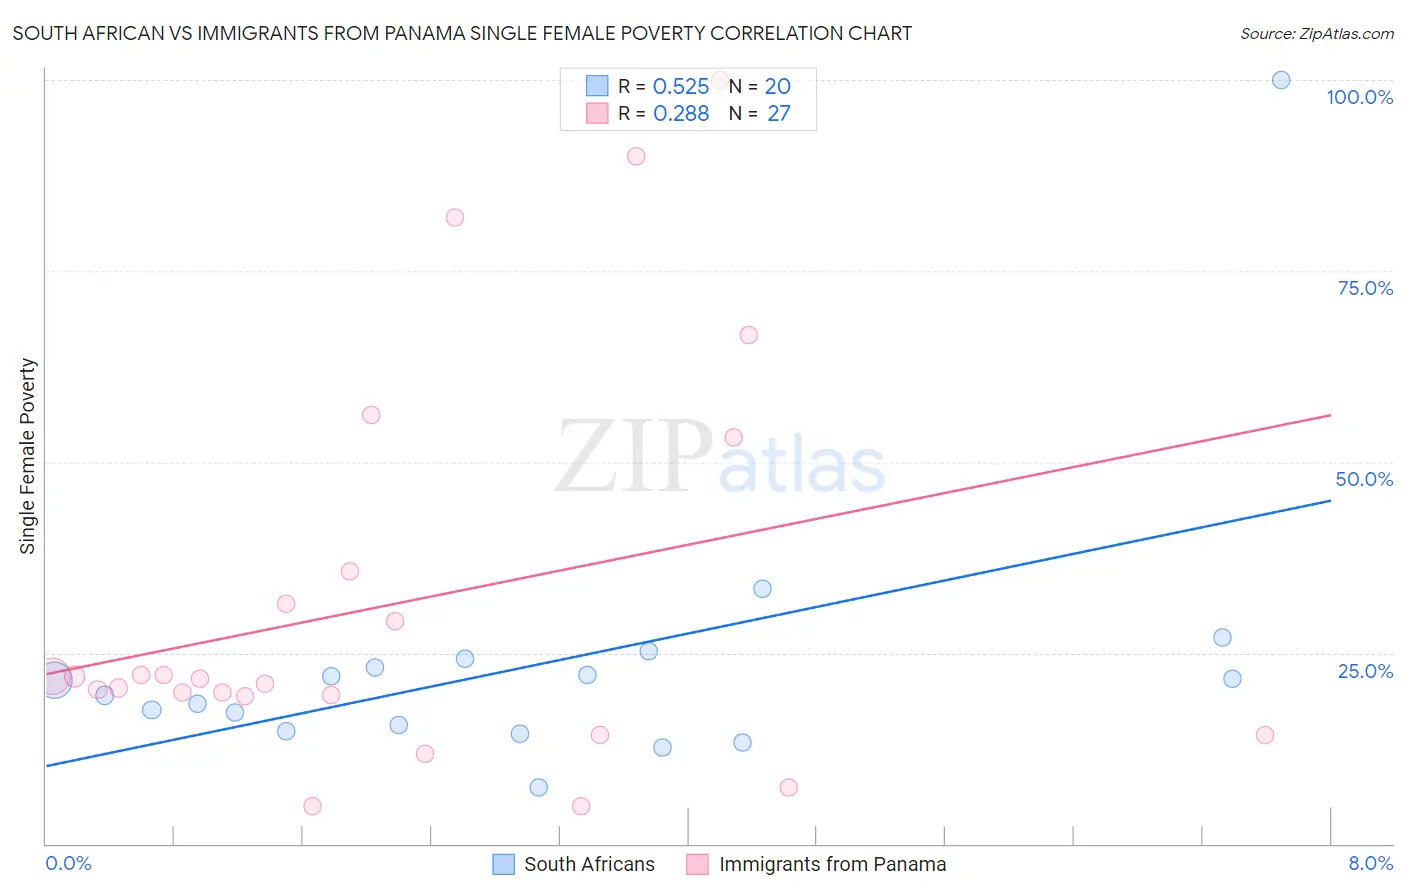 South African vs Immigrants from Panama Single Female Poverty